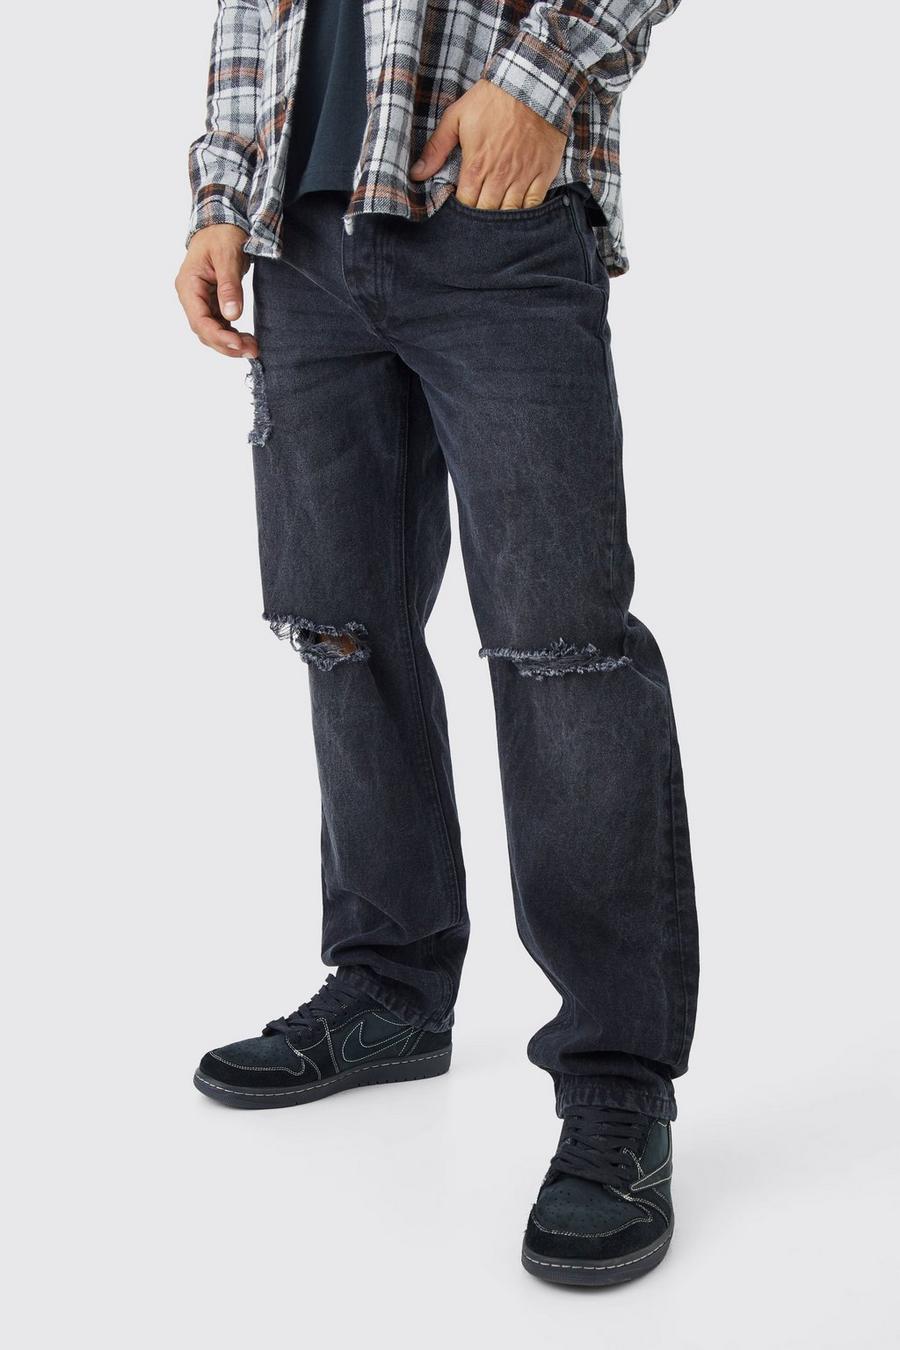 Washed black Relaxed Rigid Rip & Repair Jeans